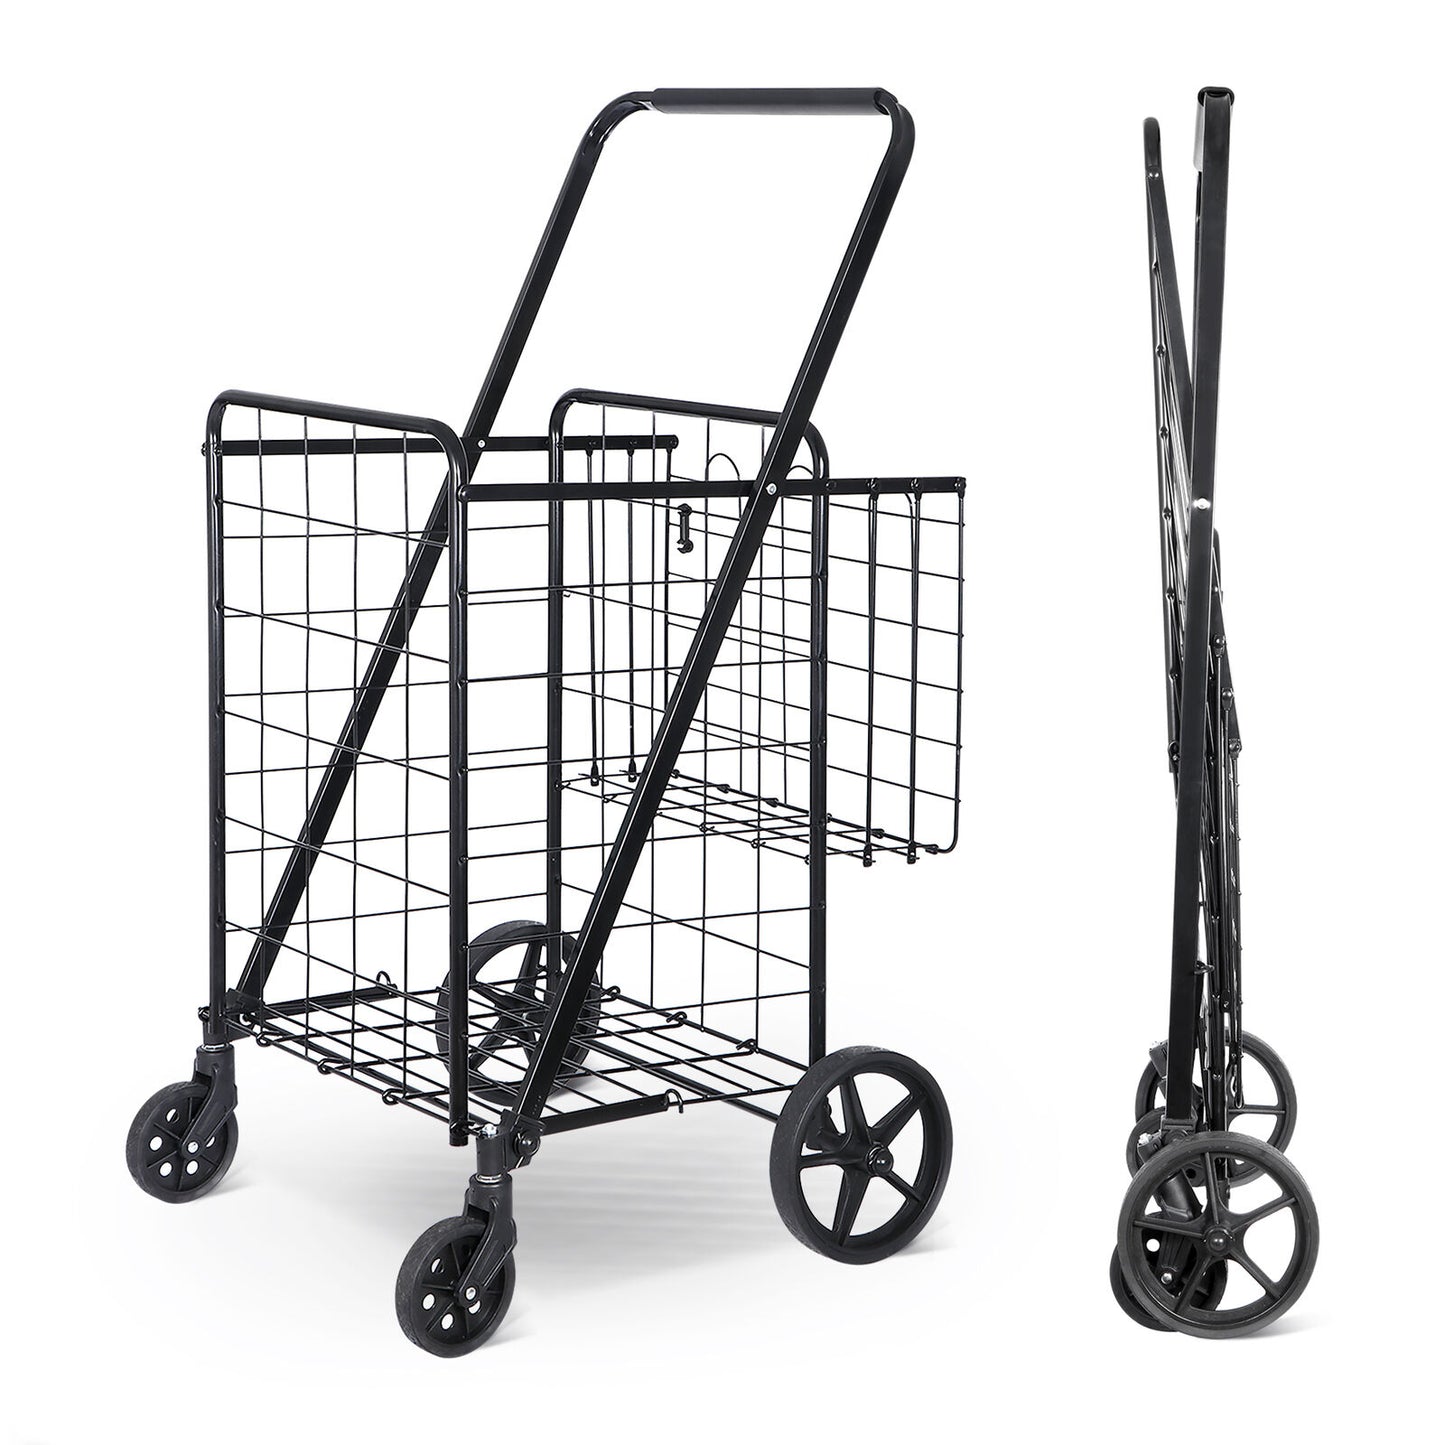 Folding Shopping Cart Utility Cart with Double Basket and Swivel Wheels